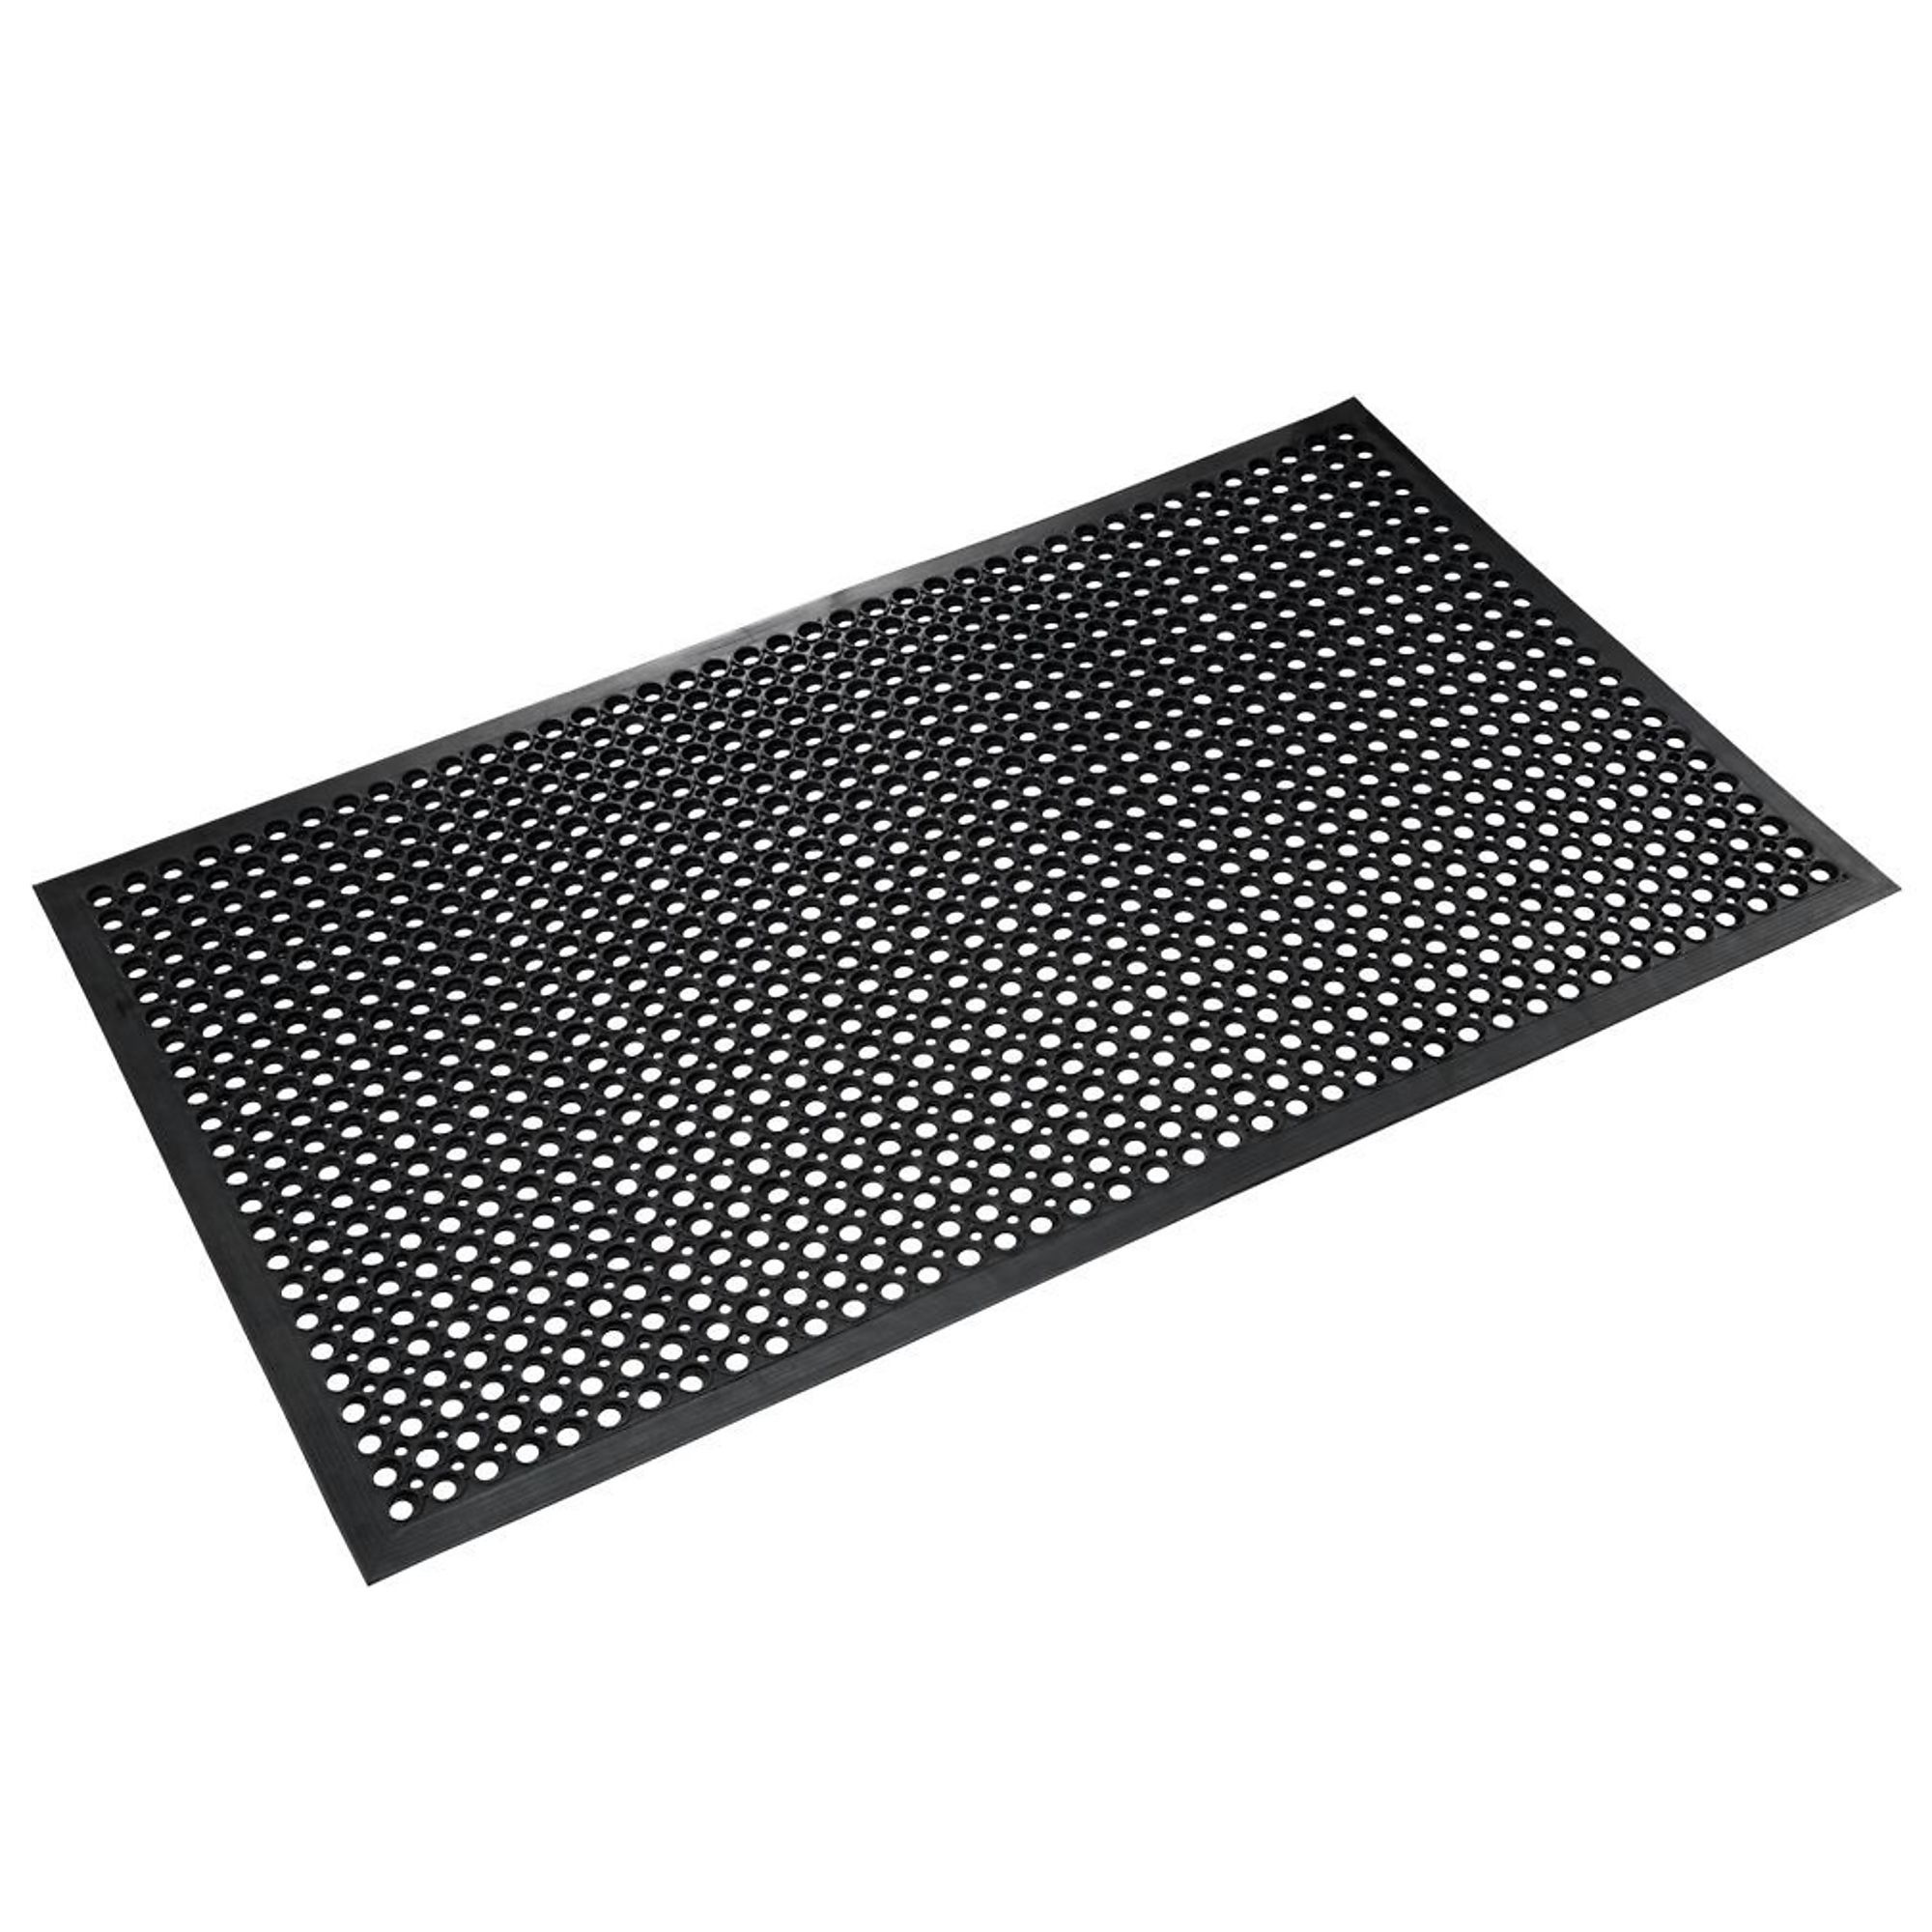 Crown Matting Technologies, Safewalk-Light General Purpose 3ft.x10ft. Black, Width 36 in, Length 120 in, Thickness 1/2 in, Model WS CT31BK